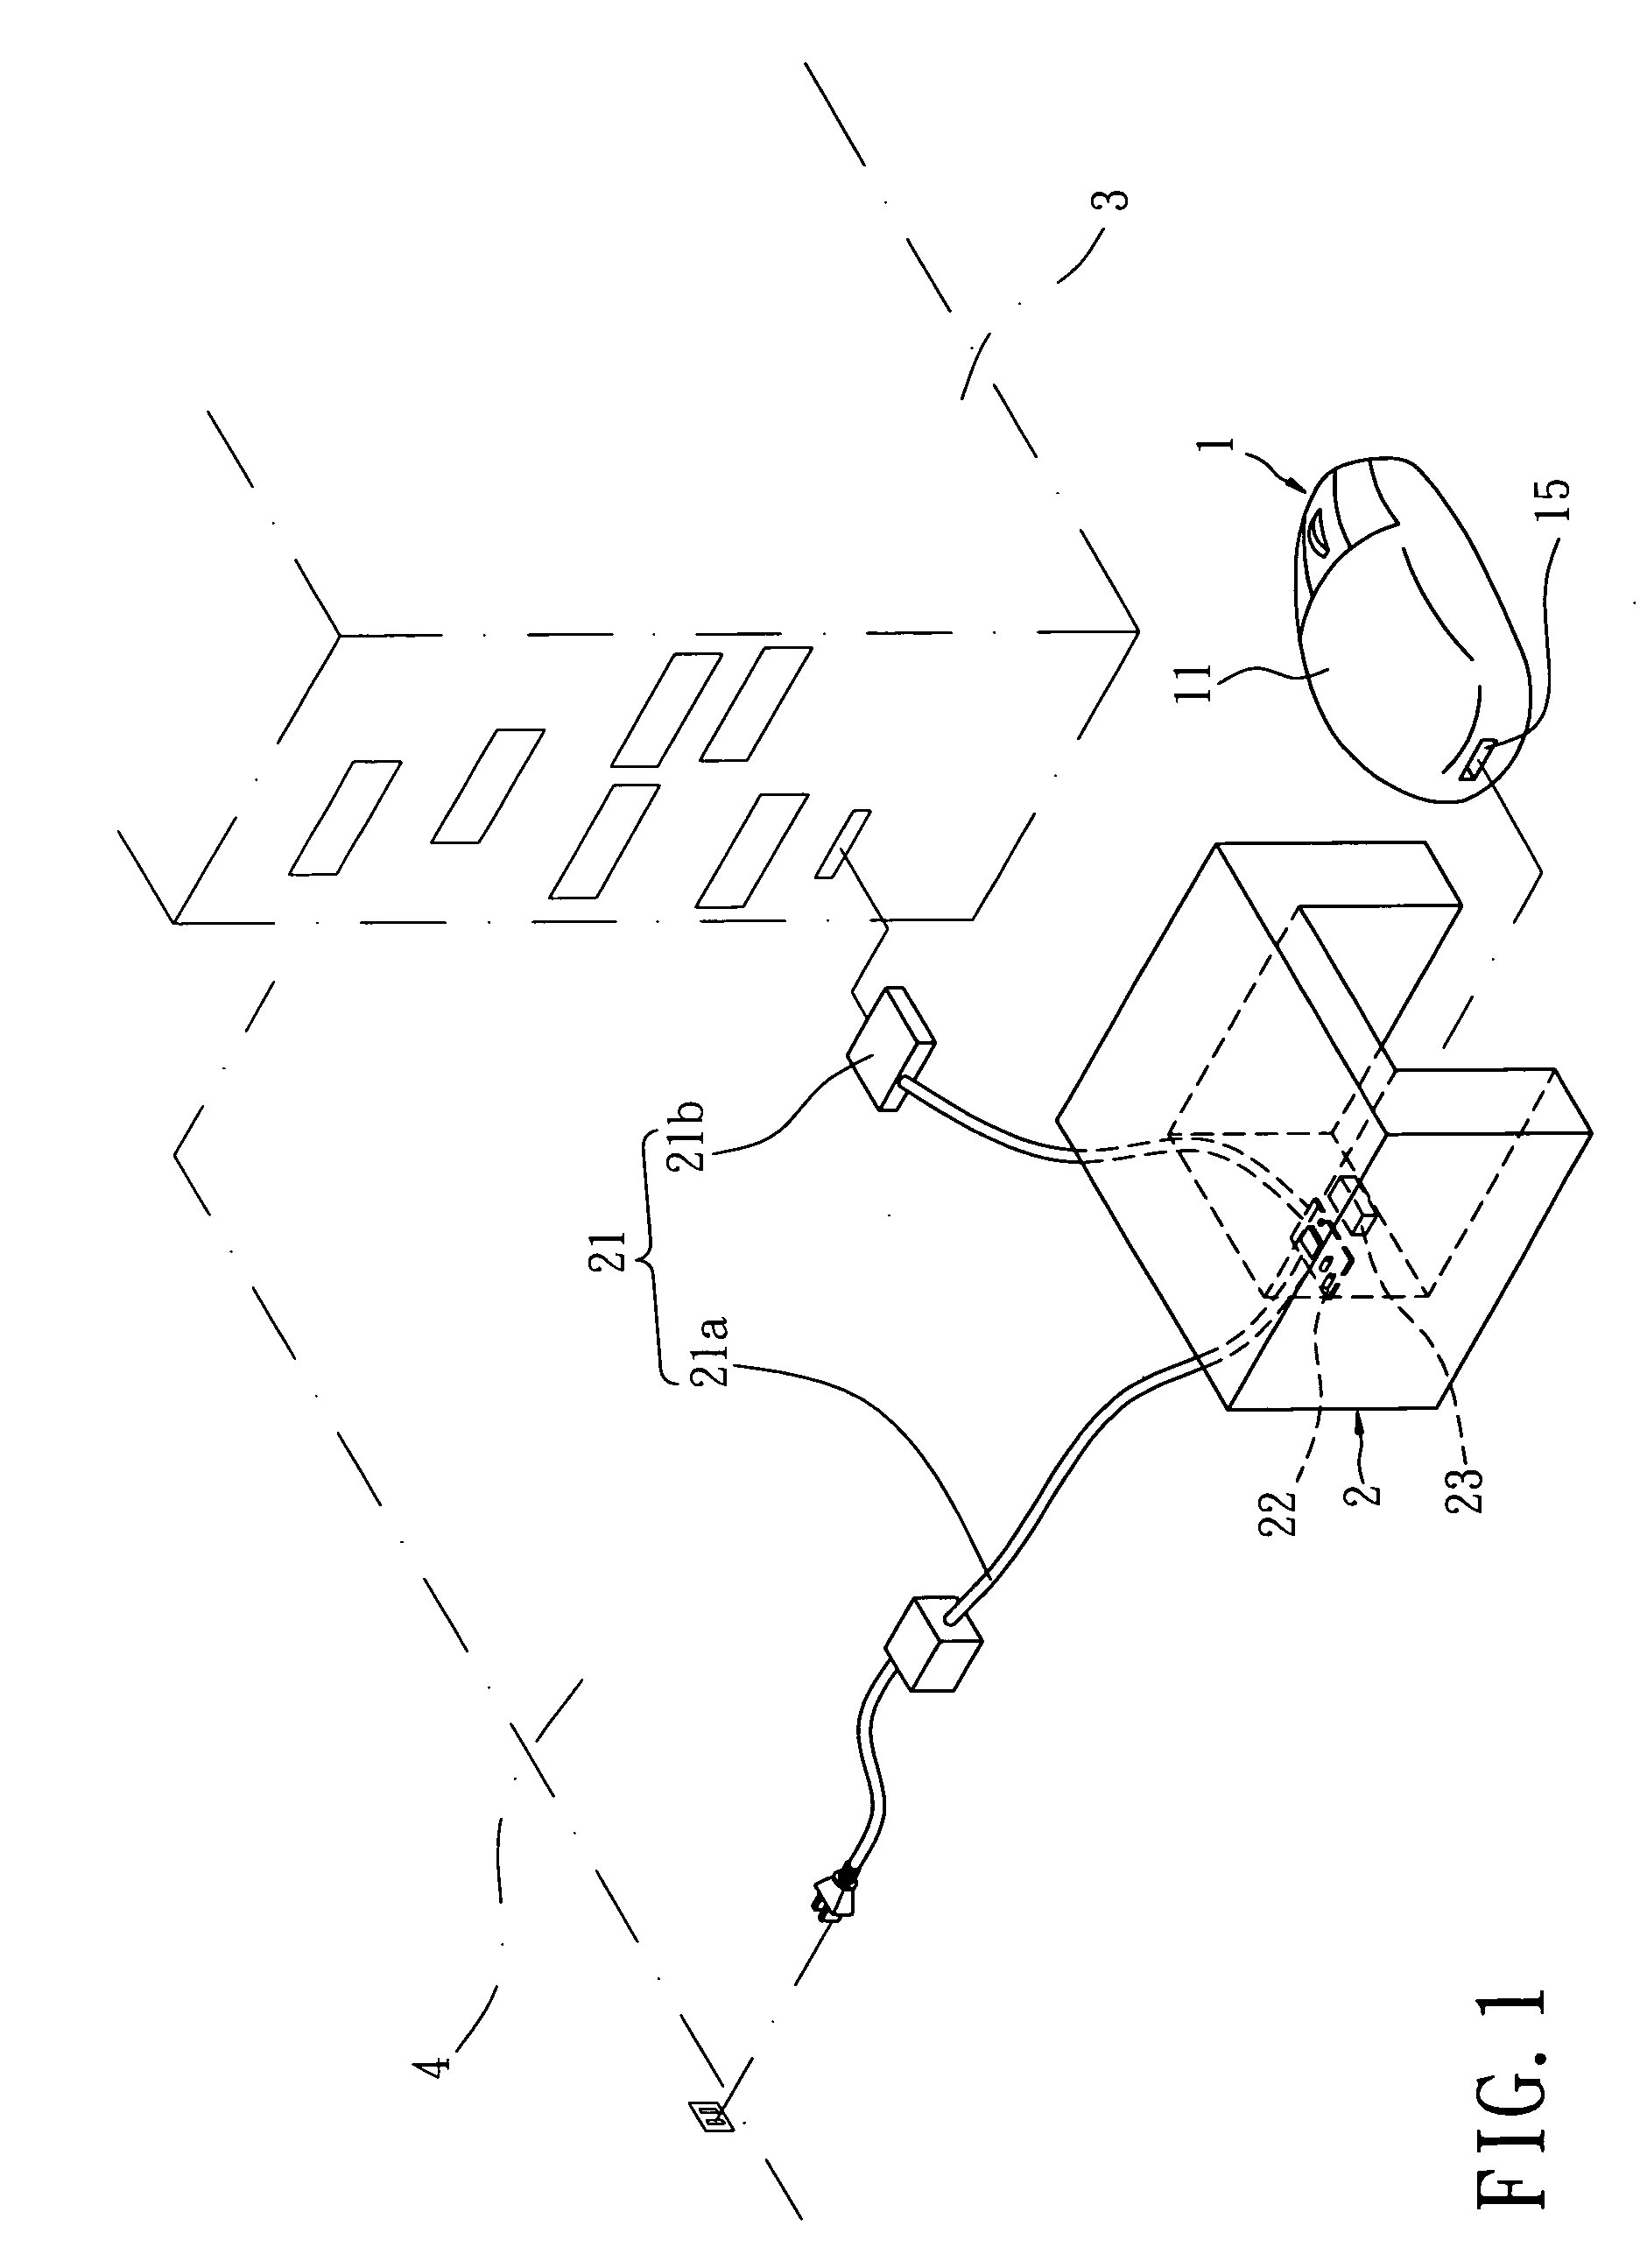 Charging device and its charging method of self-moving type of mouse